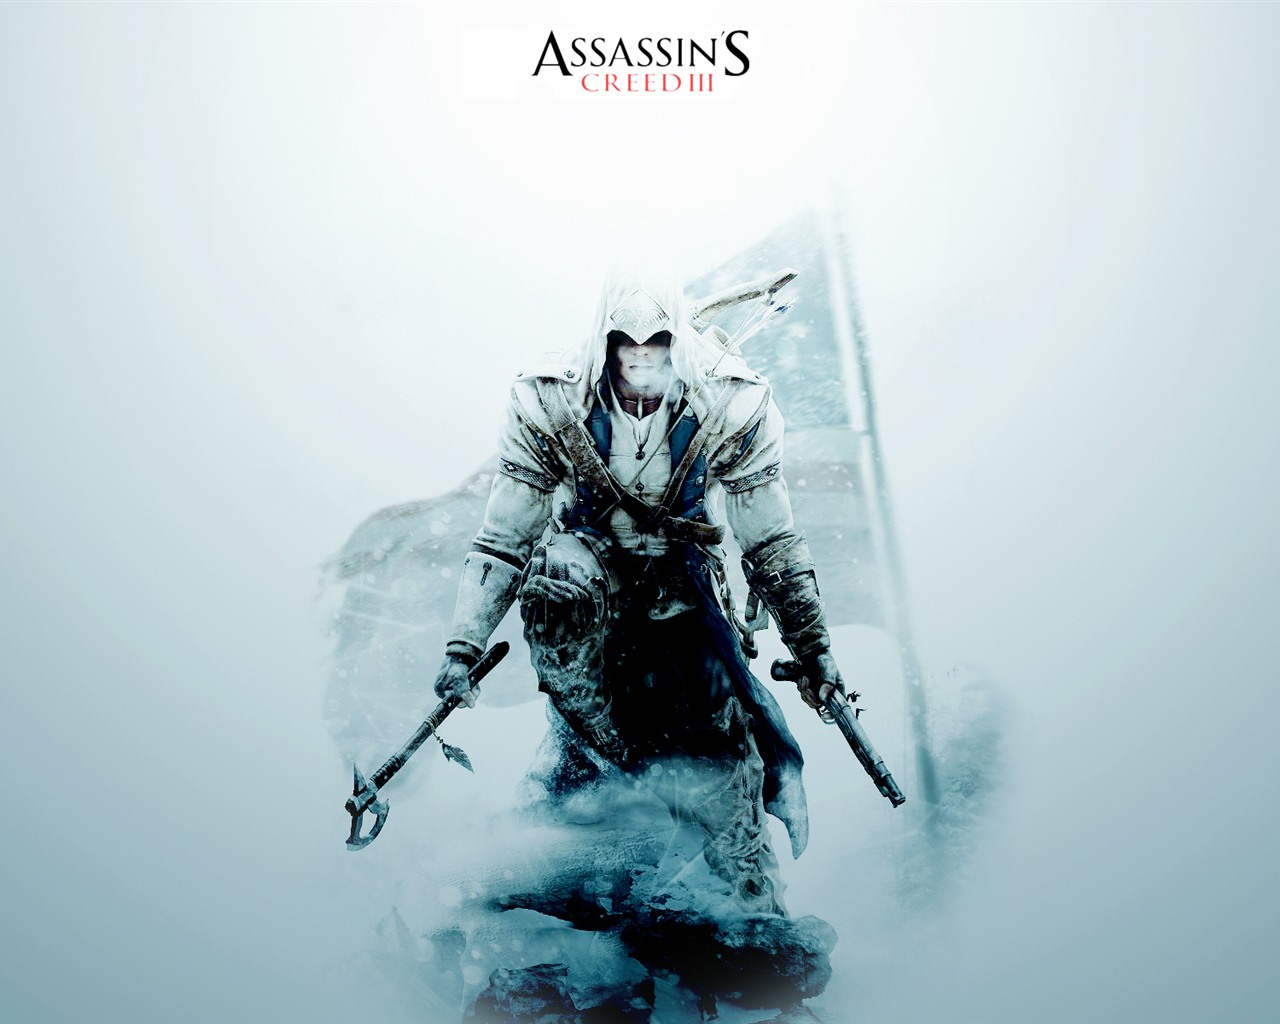 Assassin's Creed 3 HD wallpapers #11 - 1280x1024